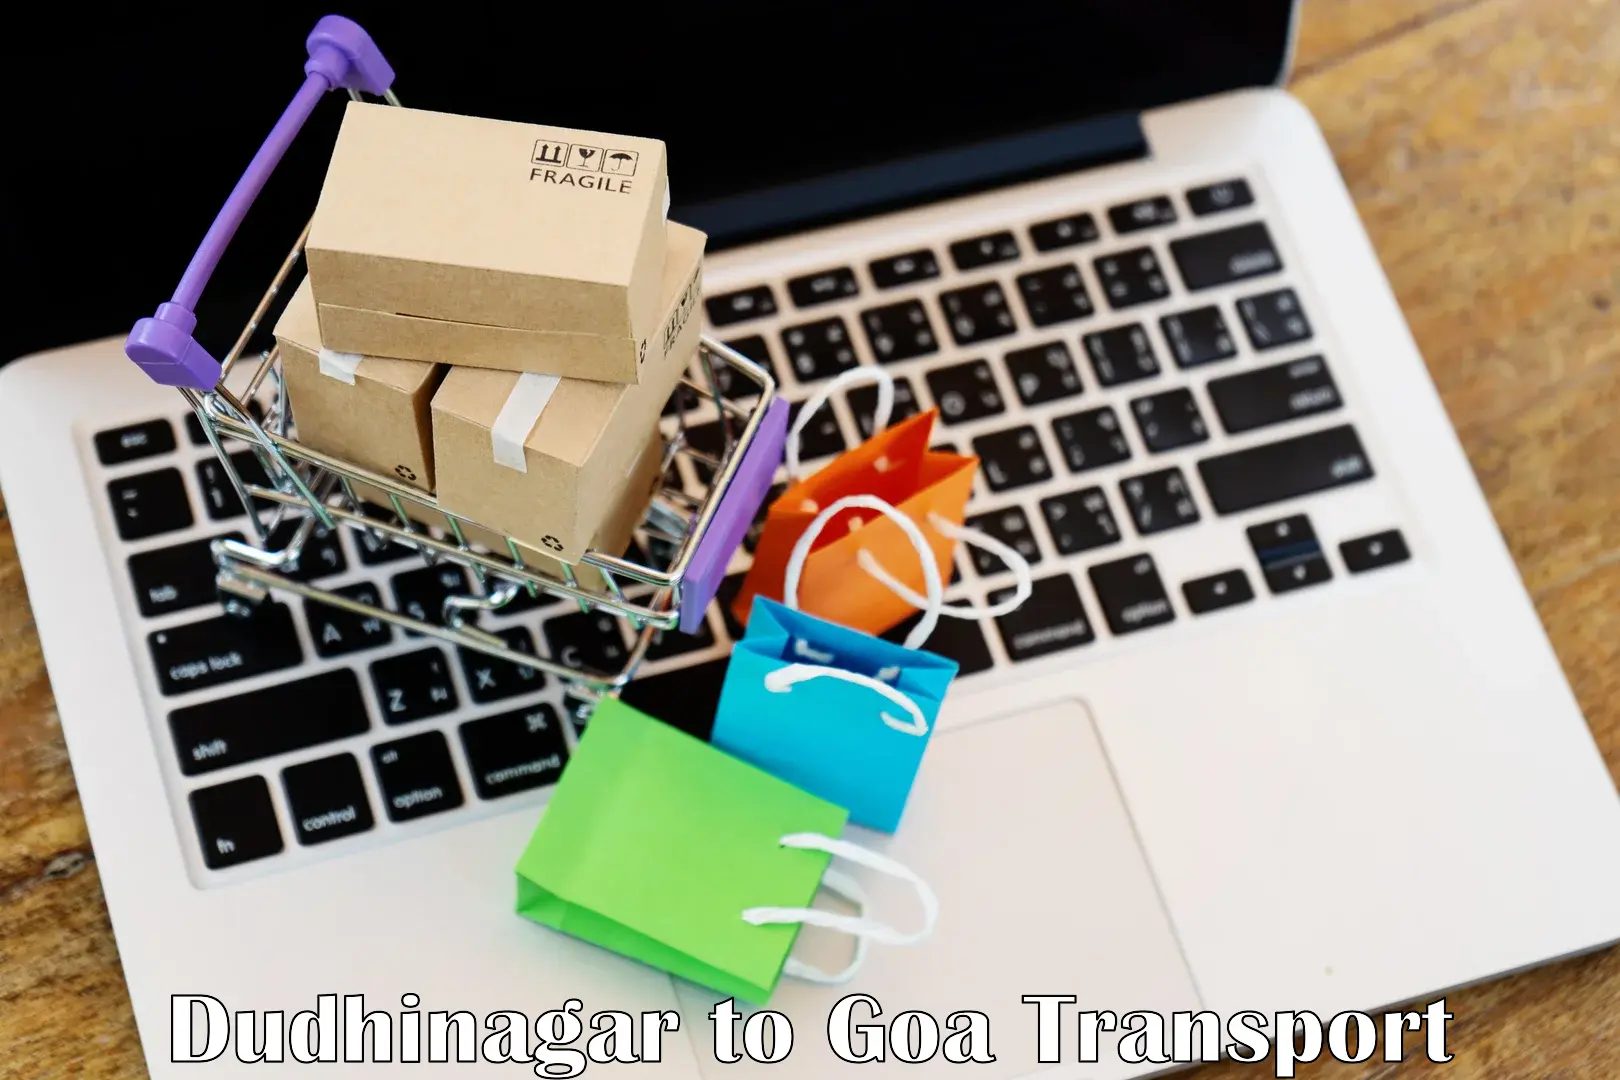 Part load transport service in India Dudhinagar to Margao